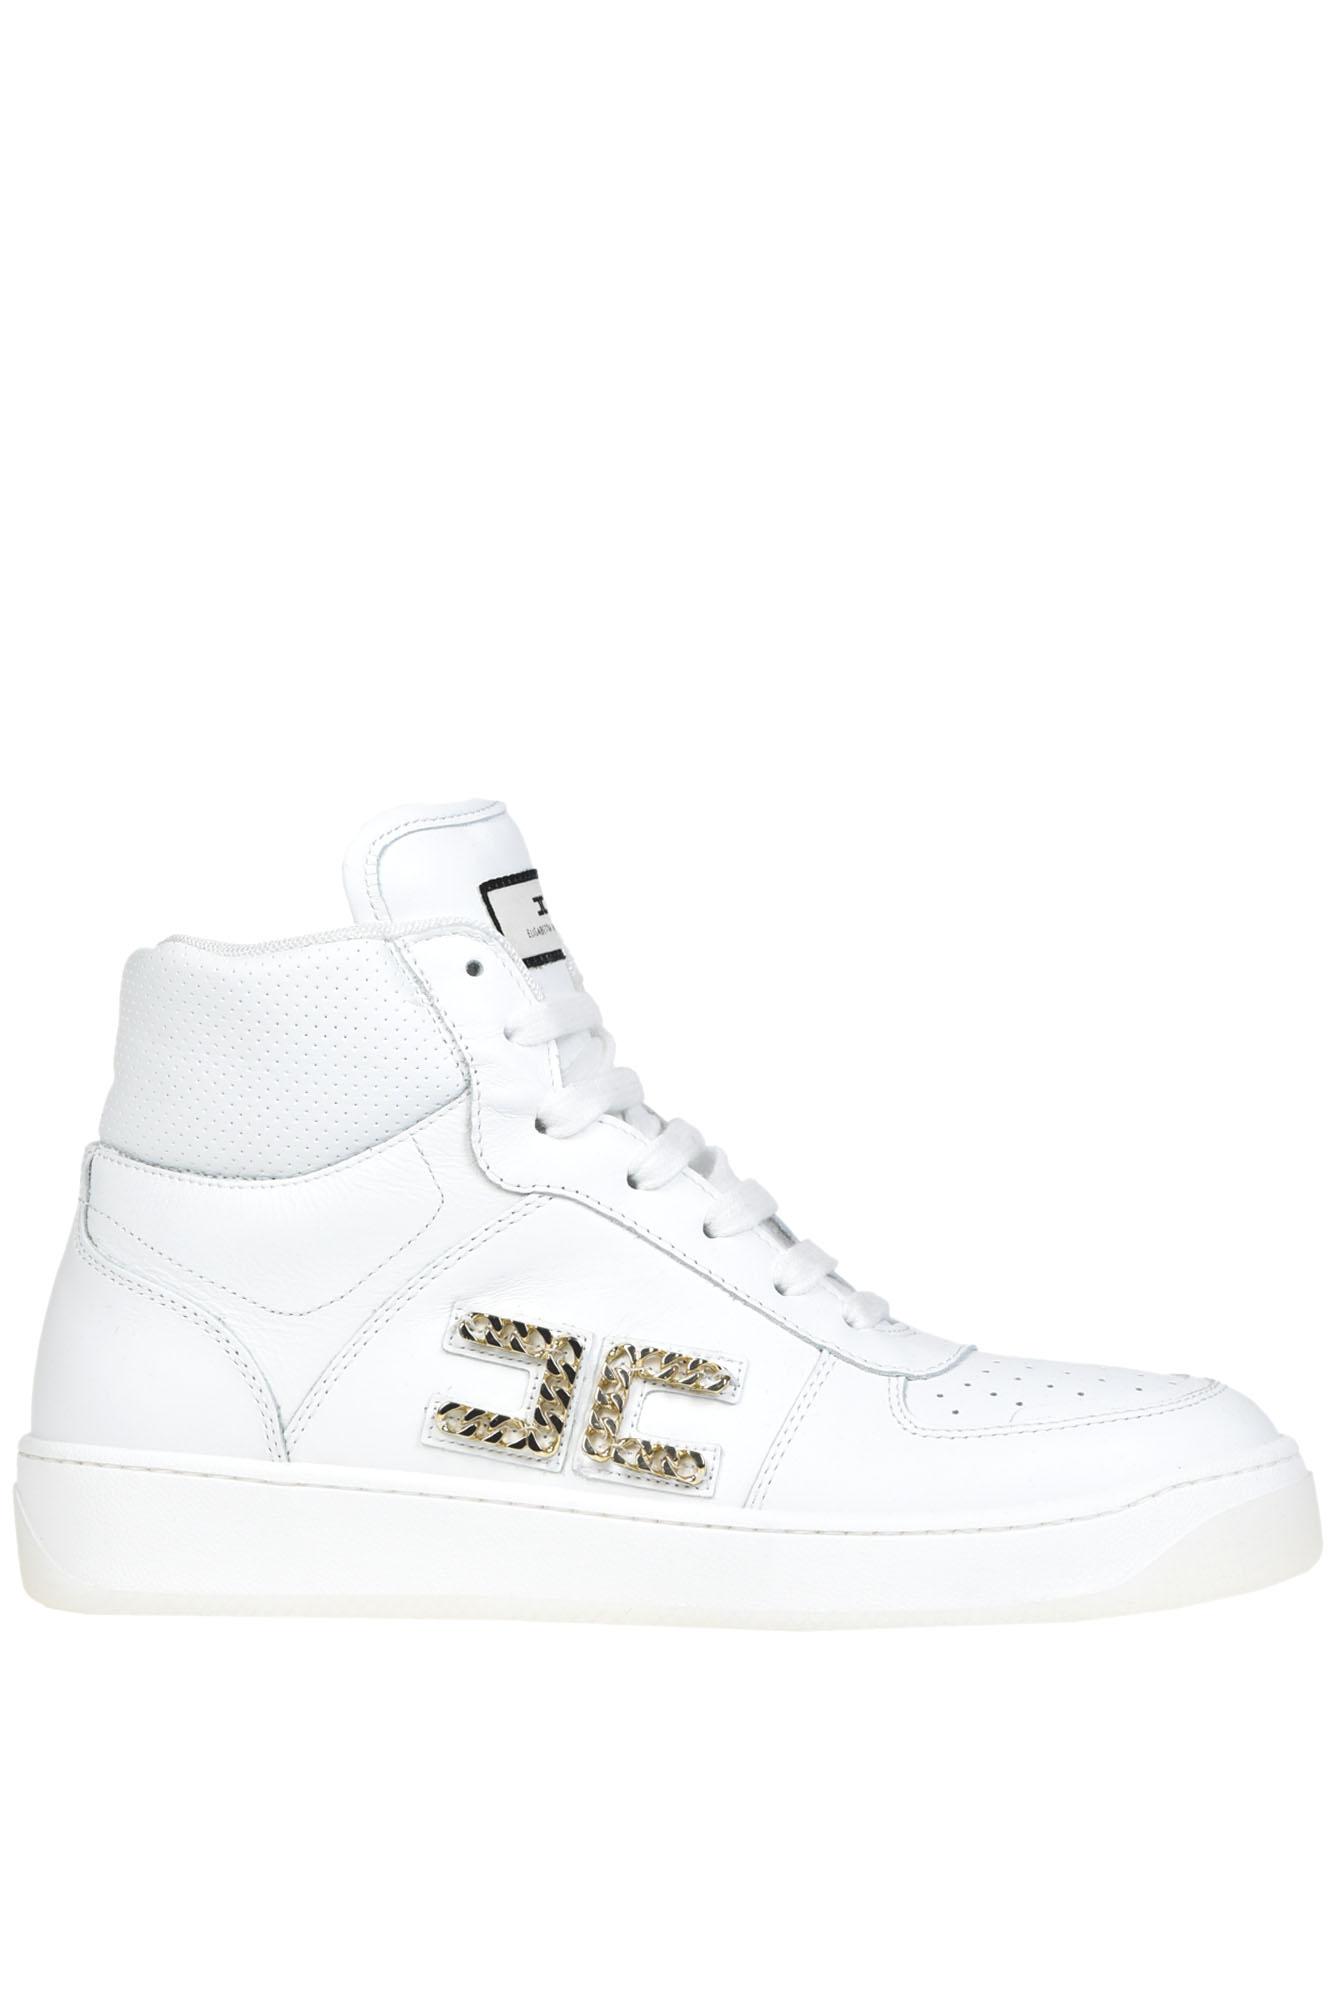 Elisabetta Franchi Leather High Top Sneakers in White | Lyst